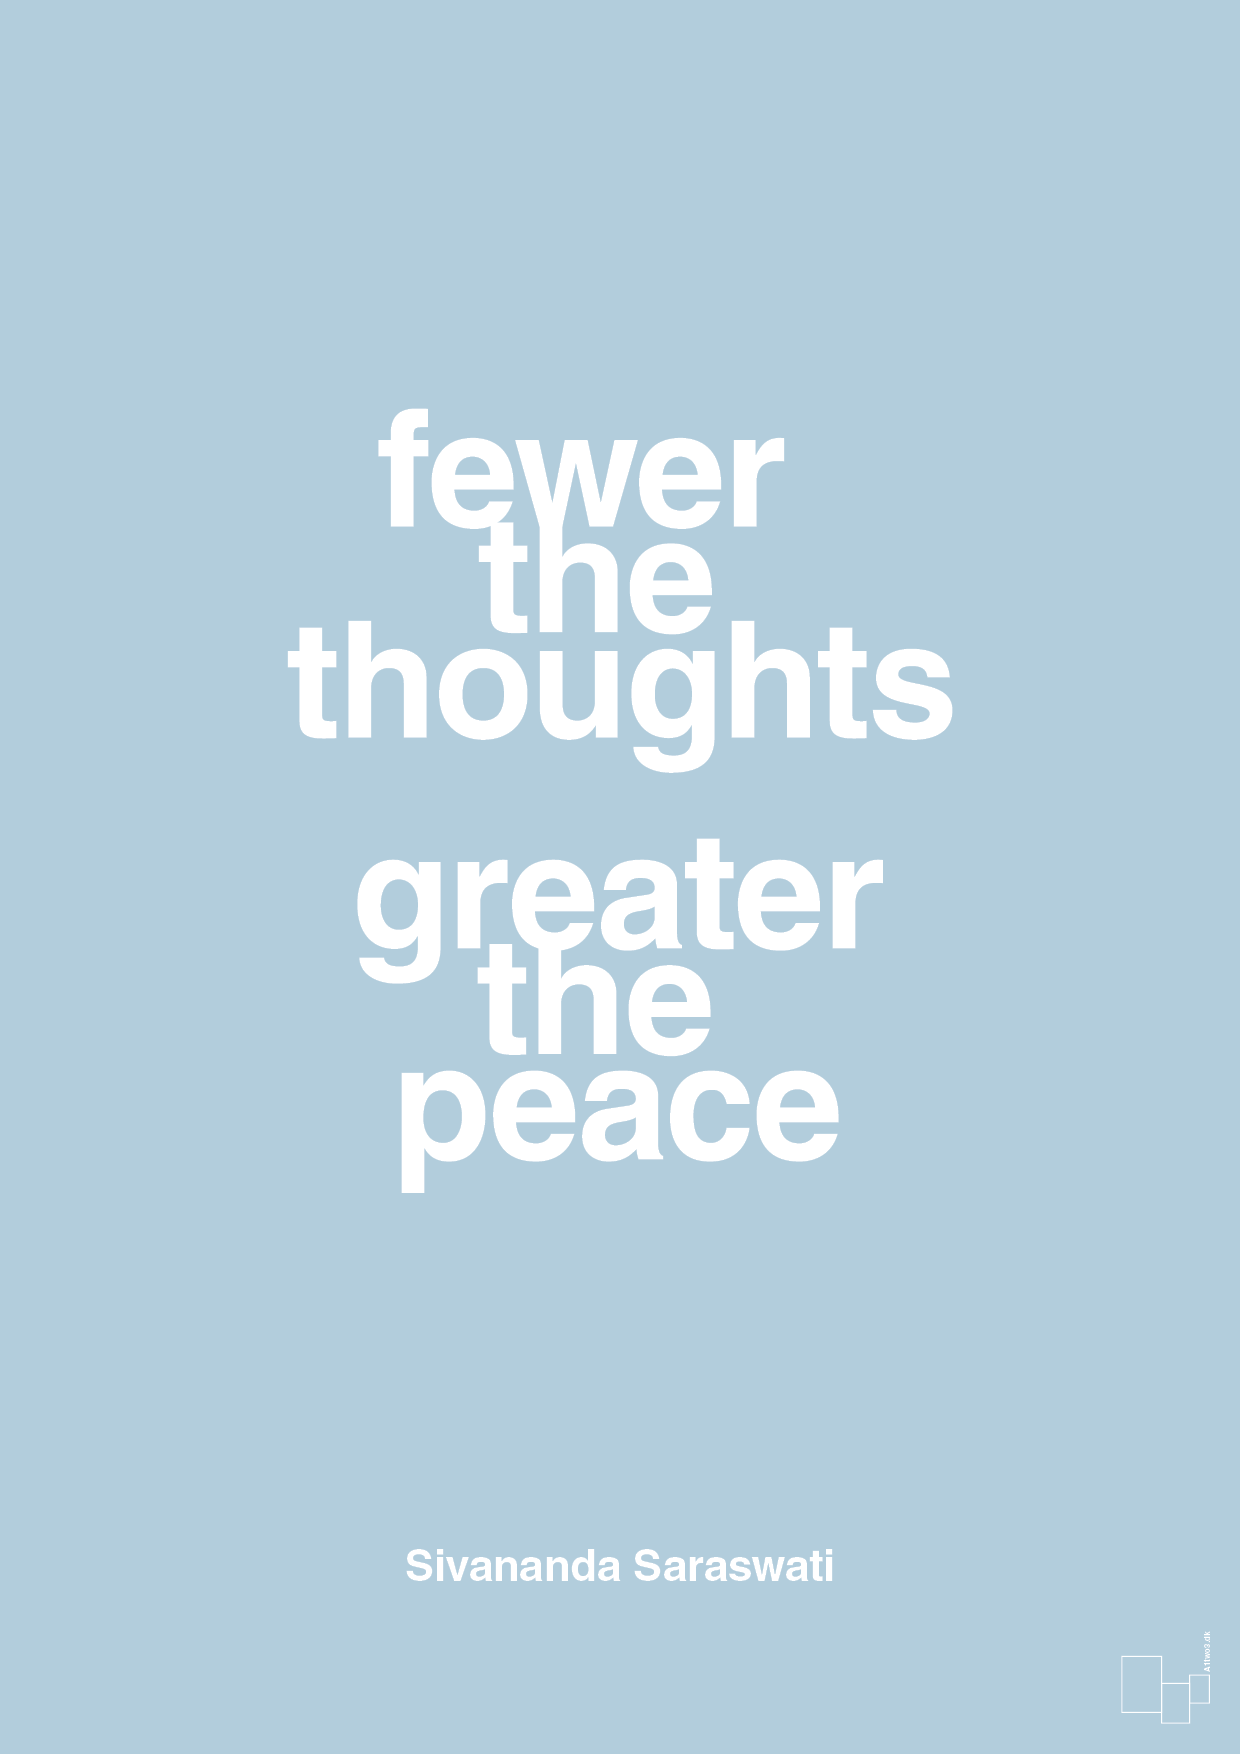 fewer the thoughts greater the peace - Plakat med Citater i Heavenly Blue